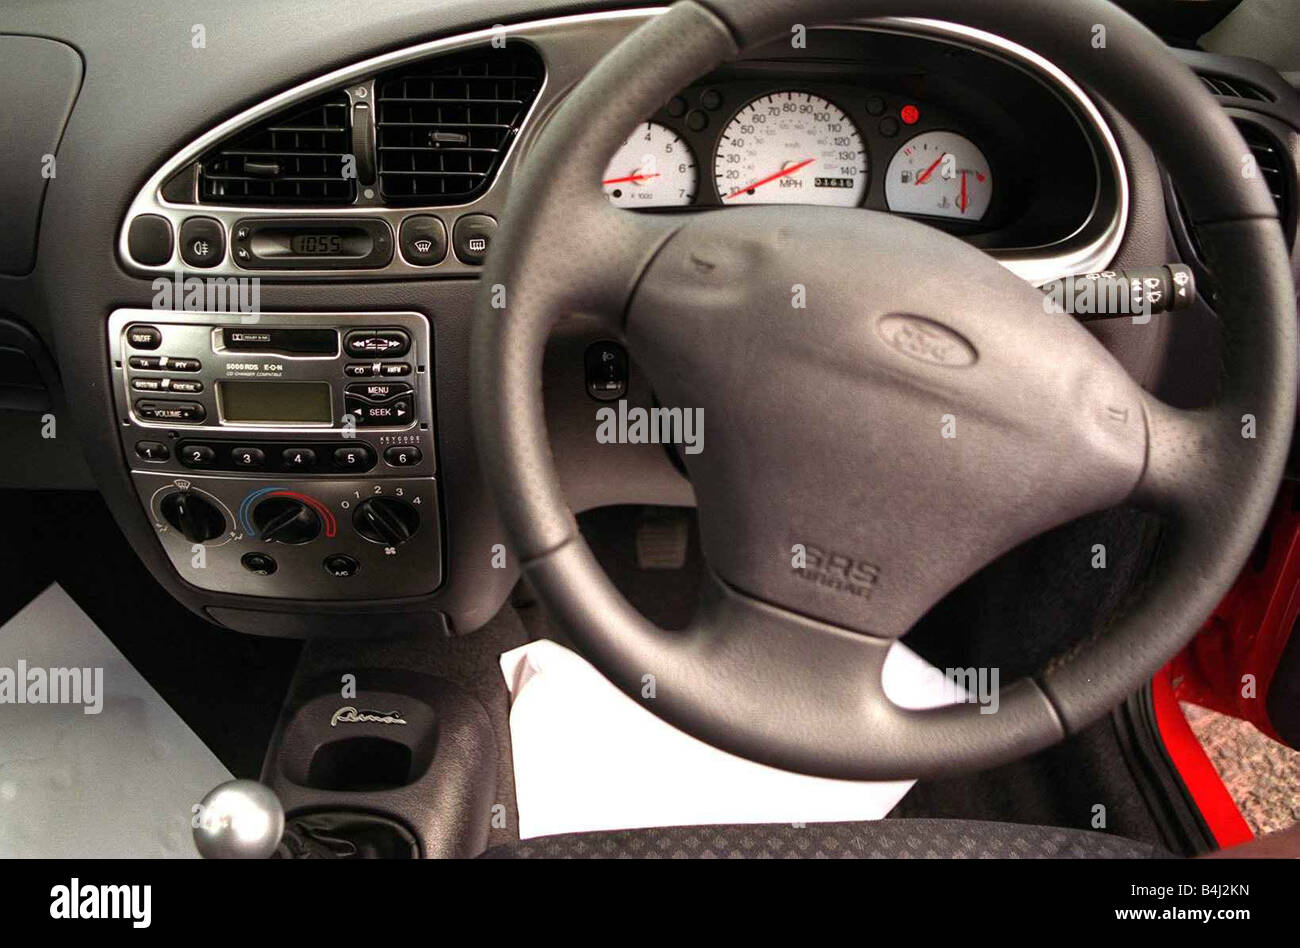 Interior of the Ford Puma car August 1997 Stock Photo - Alamy